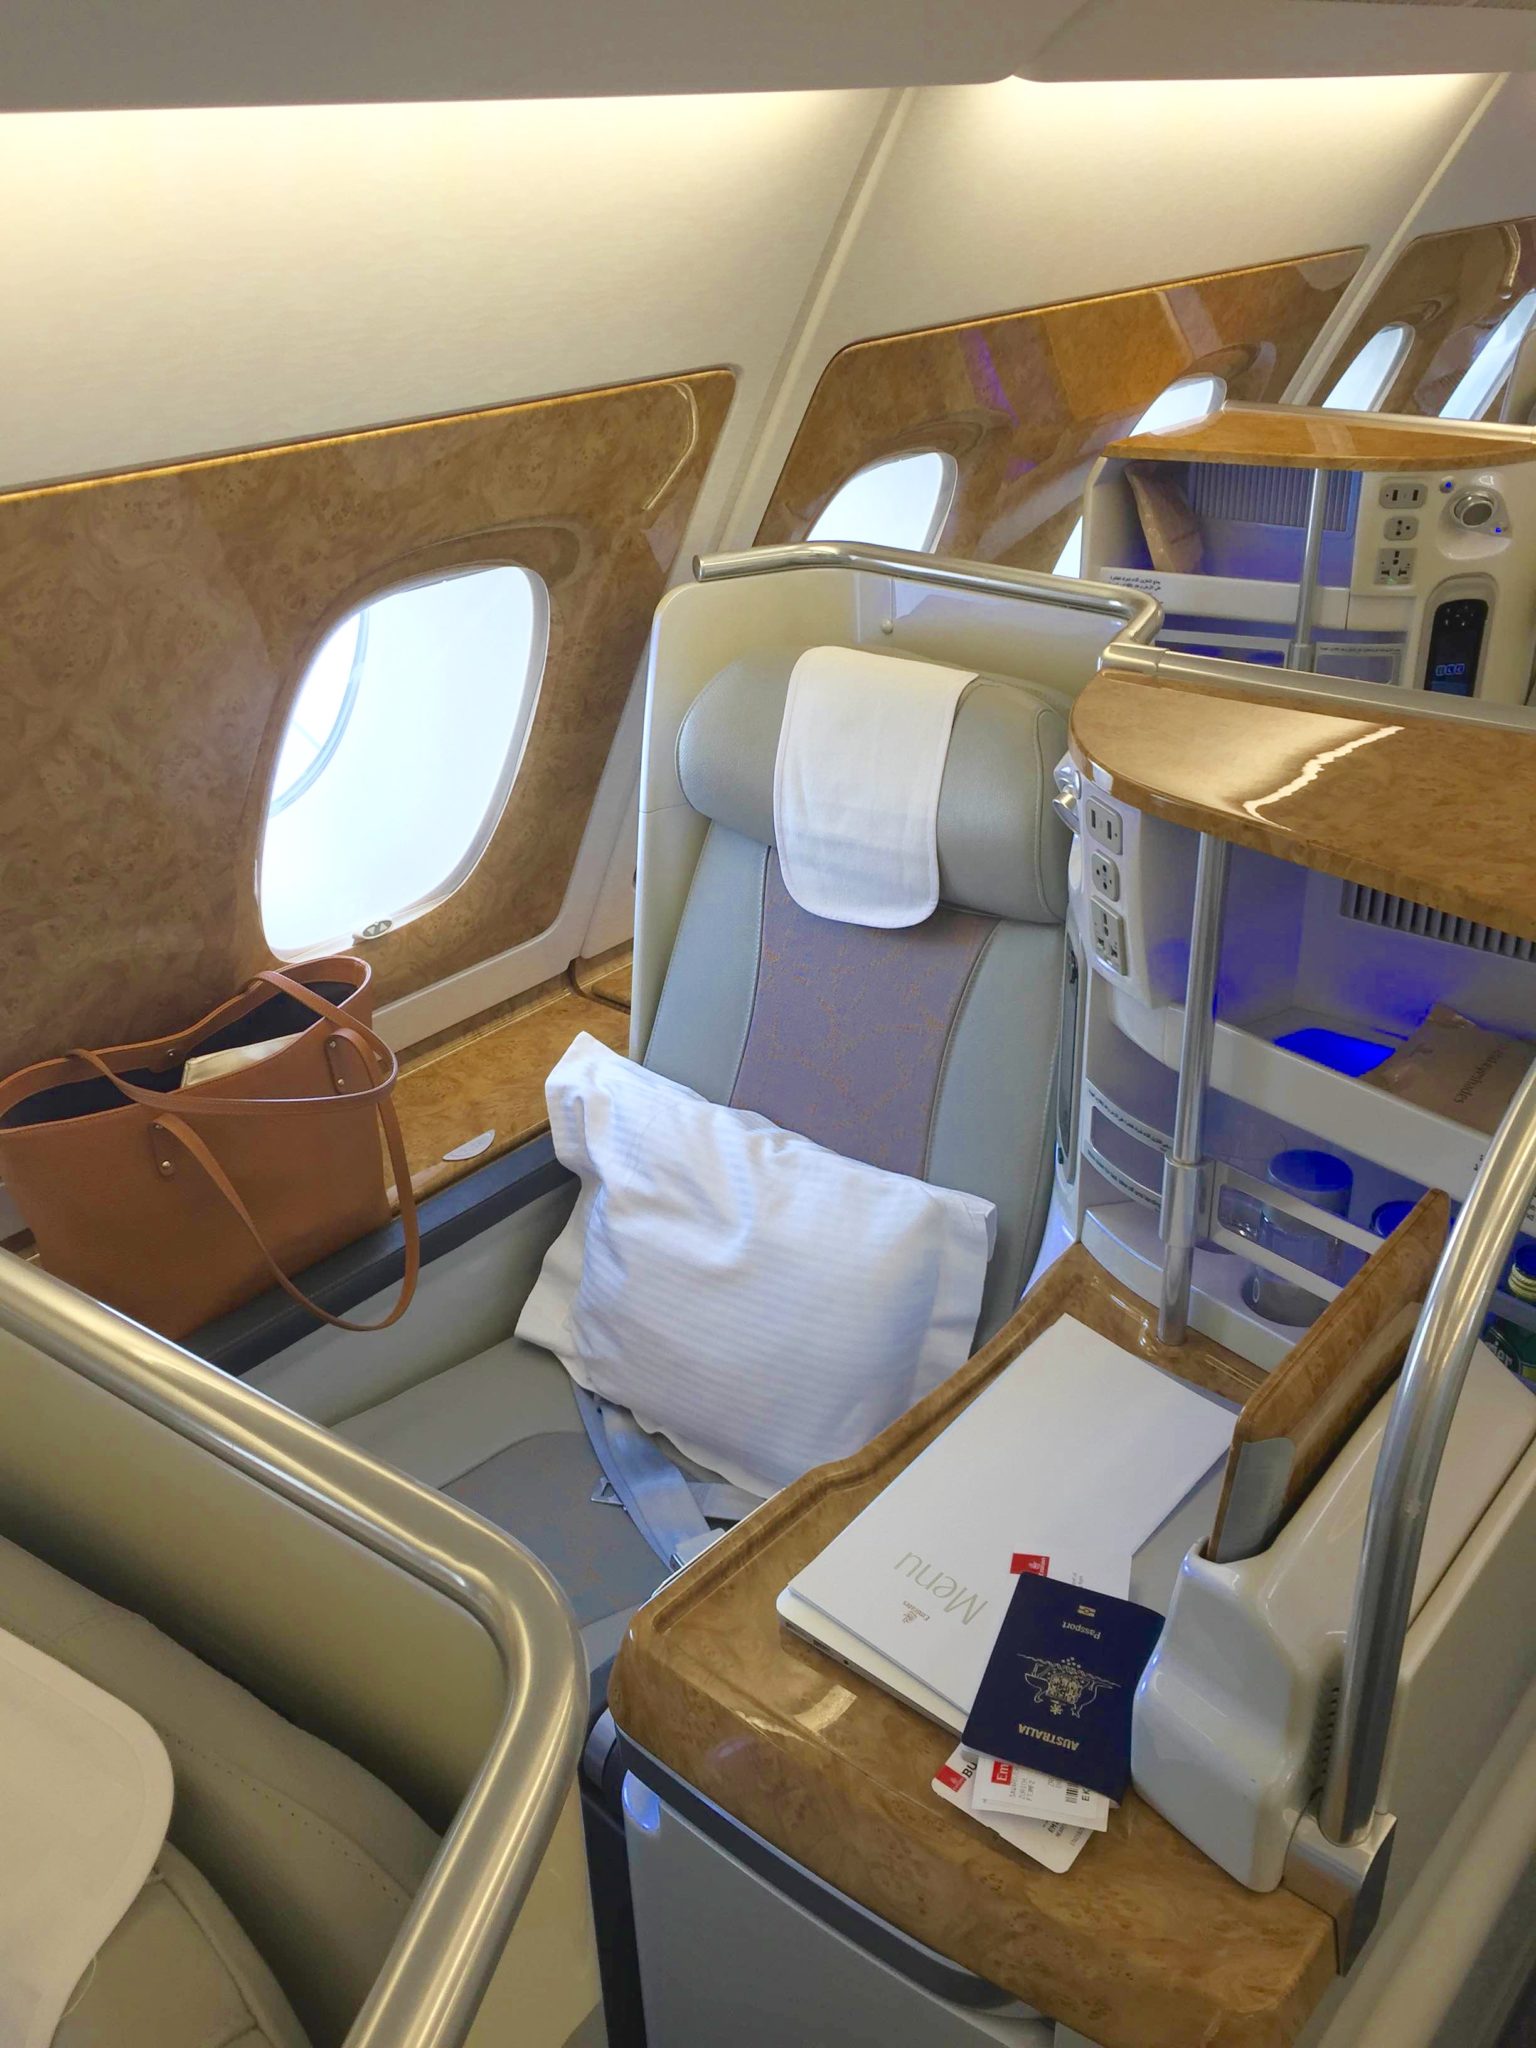 Upgrade to Business Class on Emirates - Air Travel Forum ...